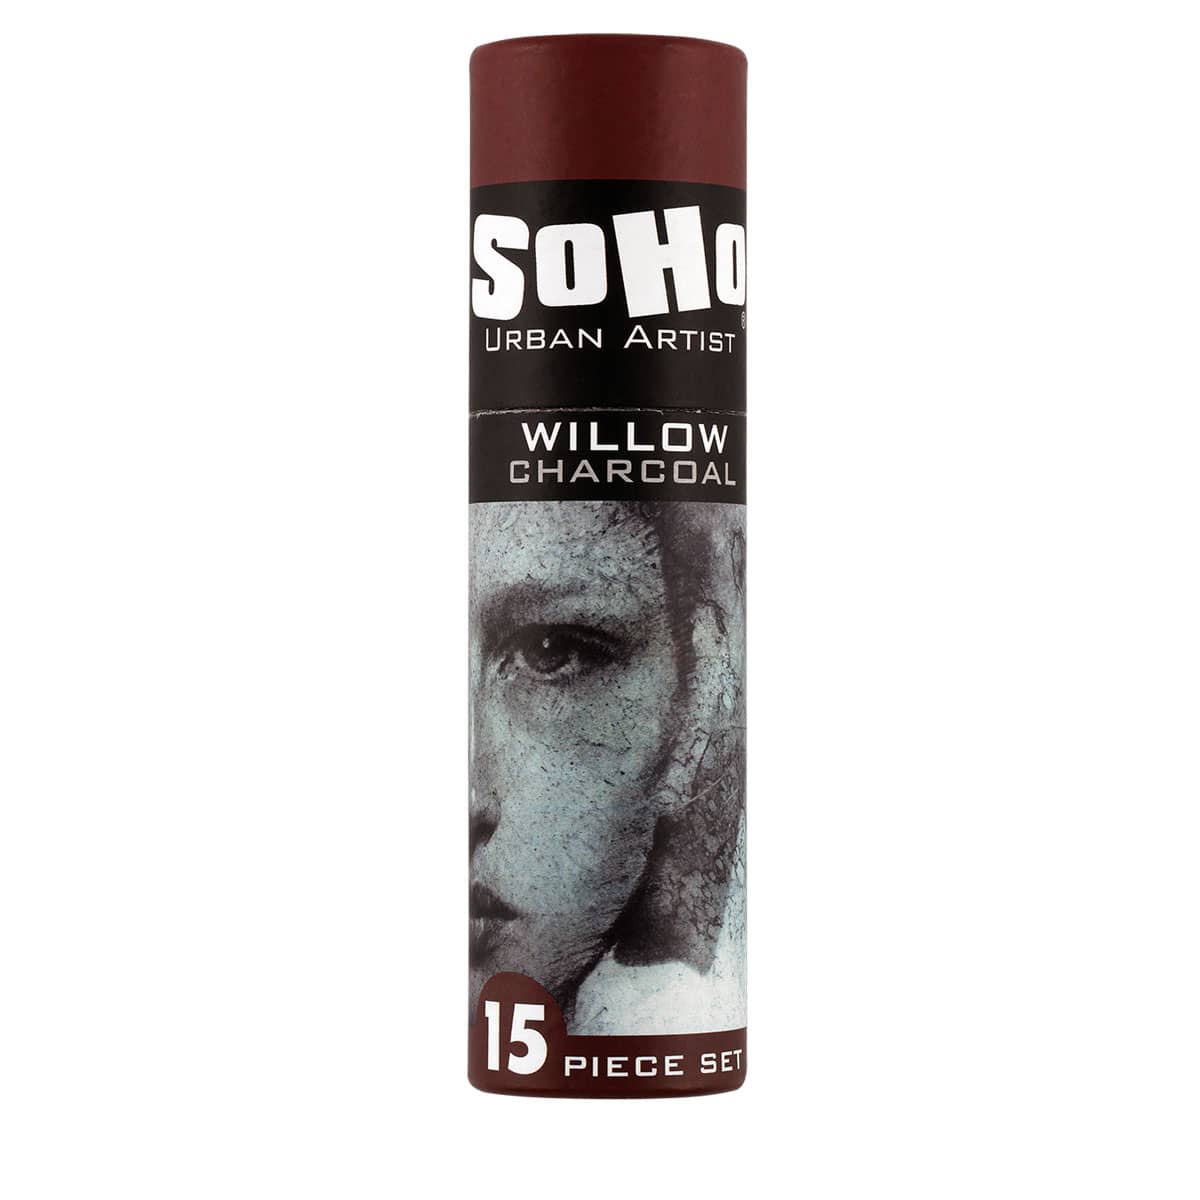 Soho Willow Charcoal Mixed Set of 15 Sticks In Tube